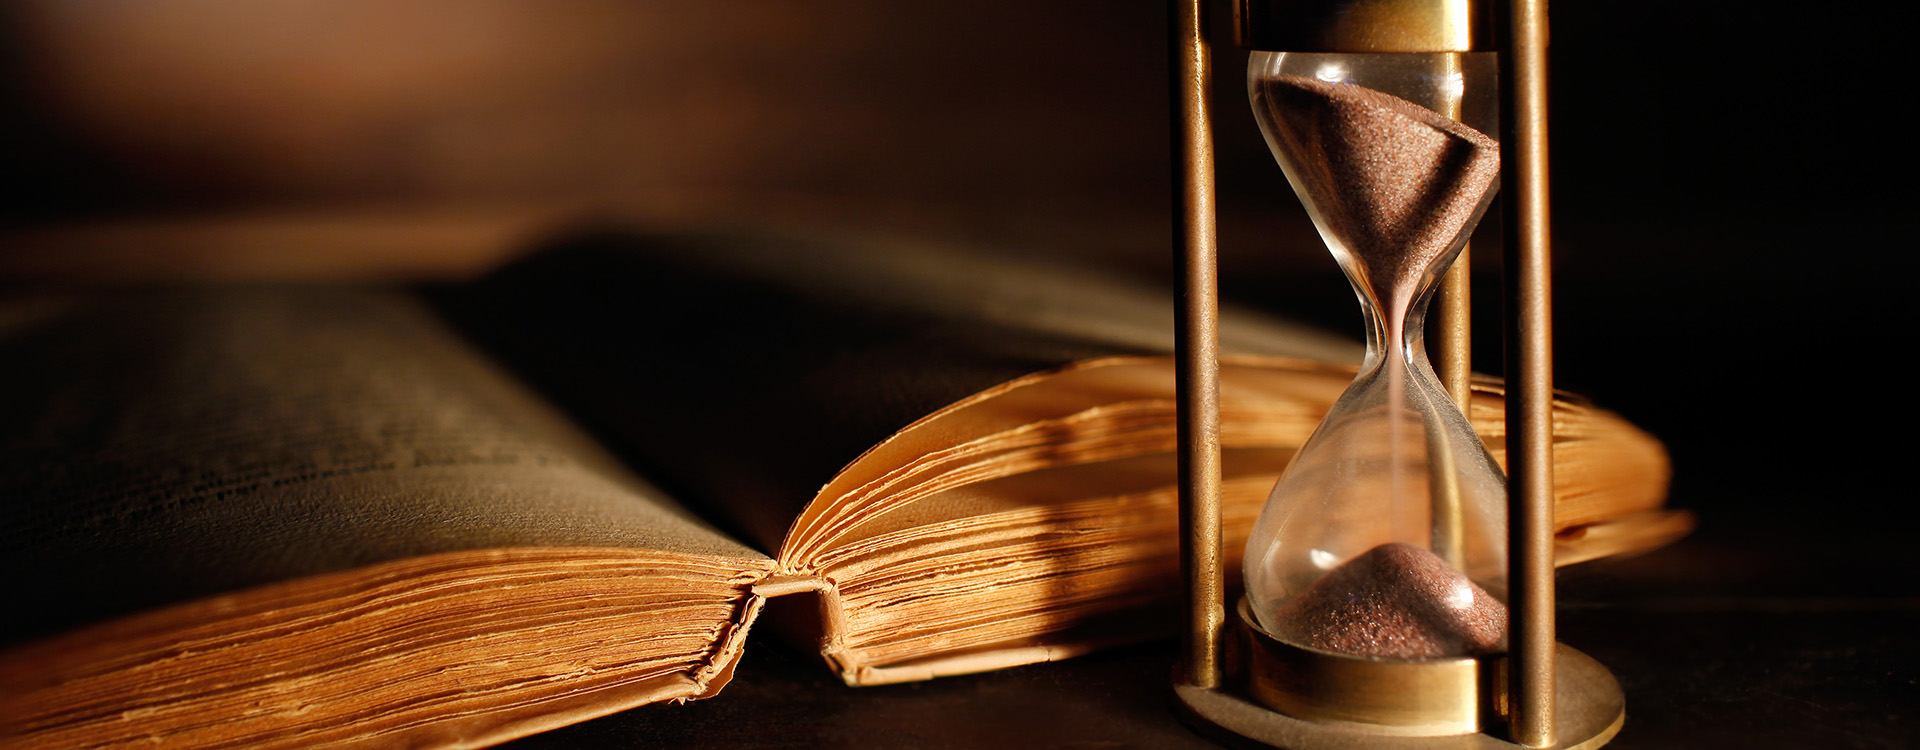 hourglass and book